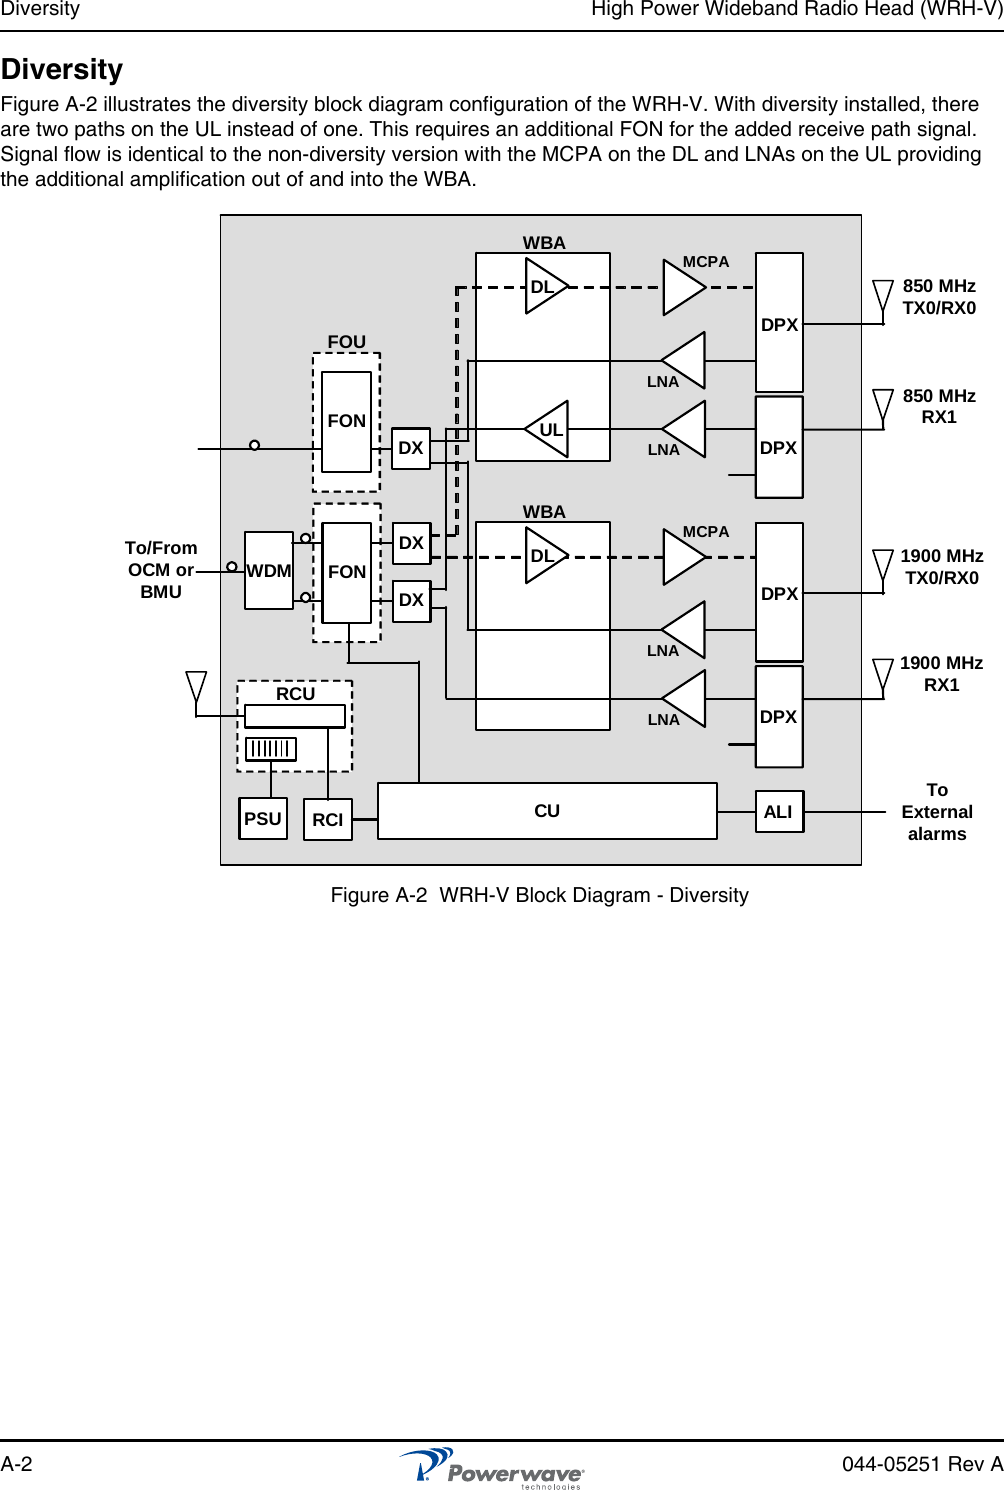 Diversity High Power Wideband Radio Head (WRH-V)A-2 044-05251 Rev ADiversityFigure A-2 illustrates the diversity block diagram configuration of the WRH-V. With diversity installed, there are two paths on the UL instead of one. This requires an additional FON for the added receive path signal. Signal flow is identical to the non-diversity version with the MCPA on the DL and LNAs on the UL providing the additional amplification out of and into the WBA.Figure A-2  WRH-V Block Diagram - DiversityWDMDXDX DPXWBADLLNAMCPATo/FromOCM orBMURCURCIPSU CUFONALI ToExternalalarmsFOUDXLNADPXDPXWBALNAMCPALNADPXULDLFON1900 MHzTX0/RX0850 MHzTX0/RX0850 MHzRX11900 MHzRX1